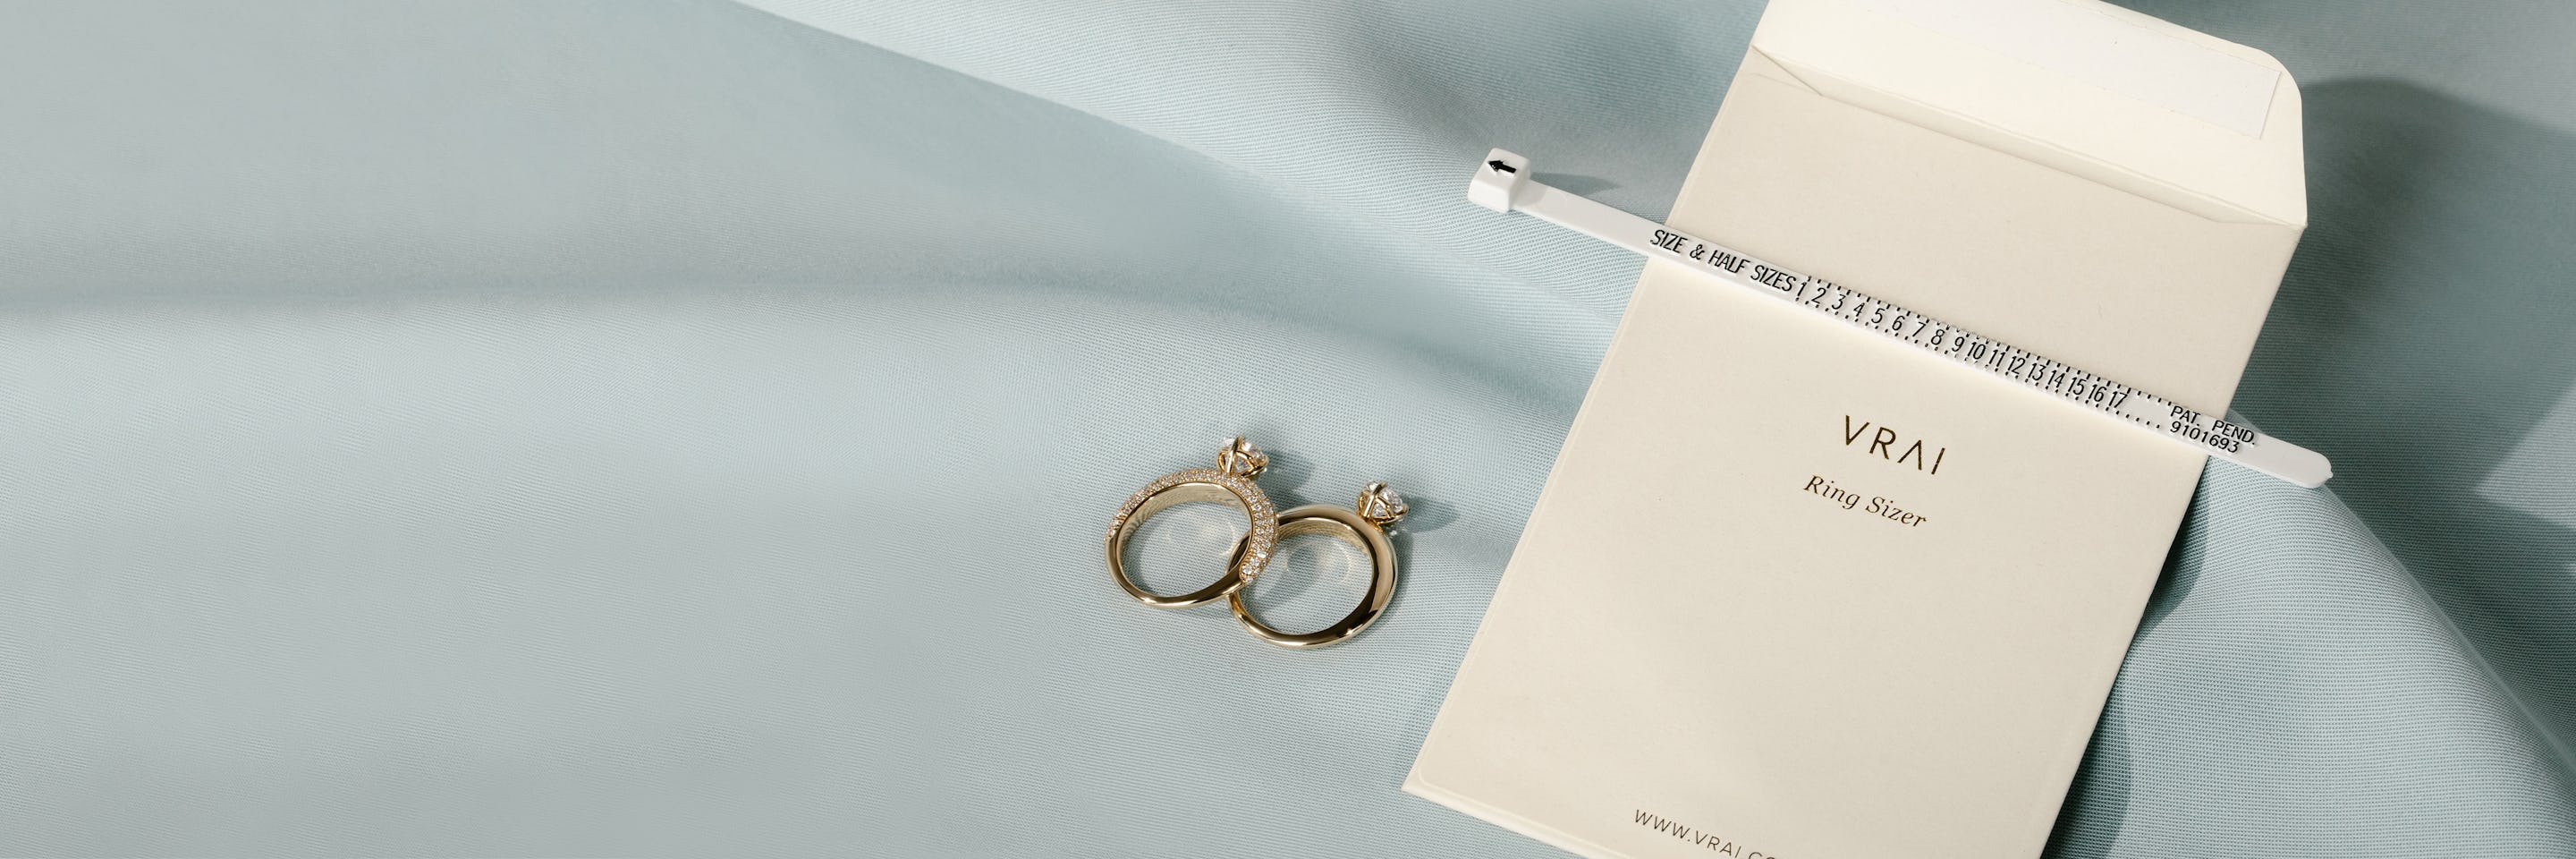 two engagement rings next to a ring sizer and package